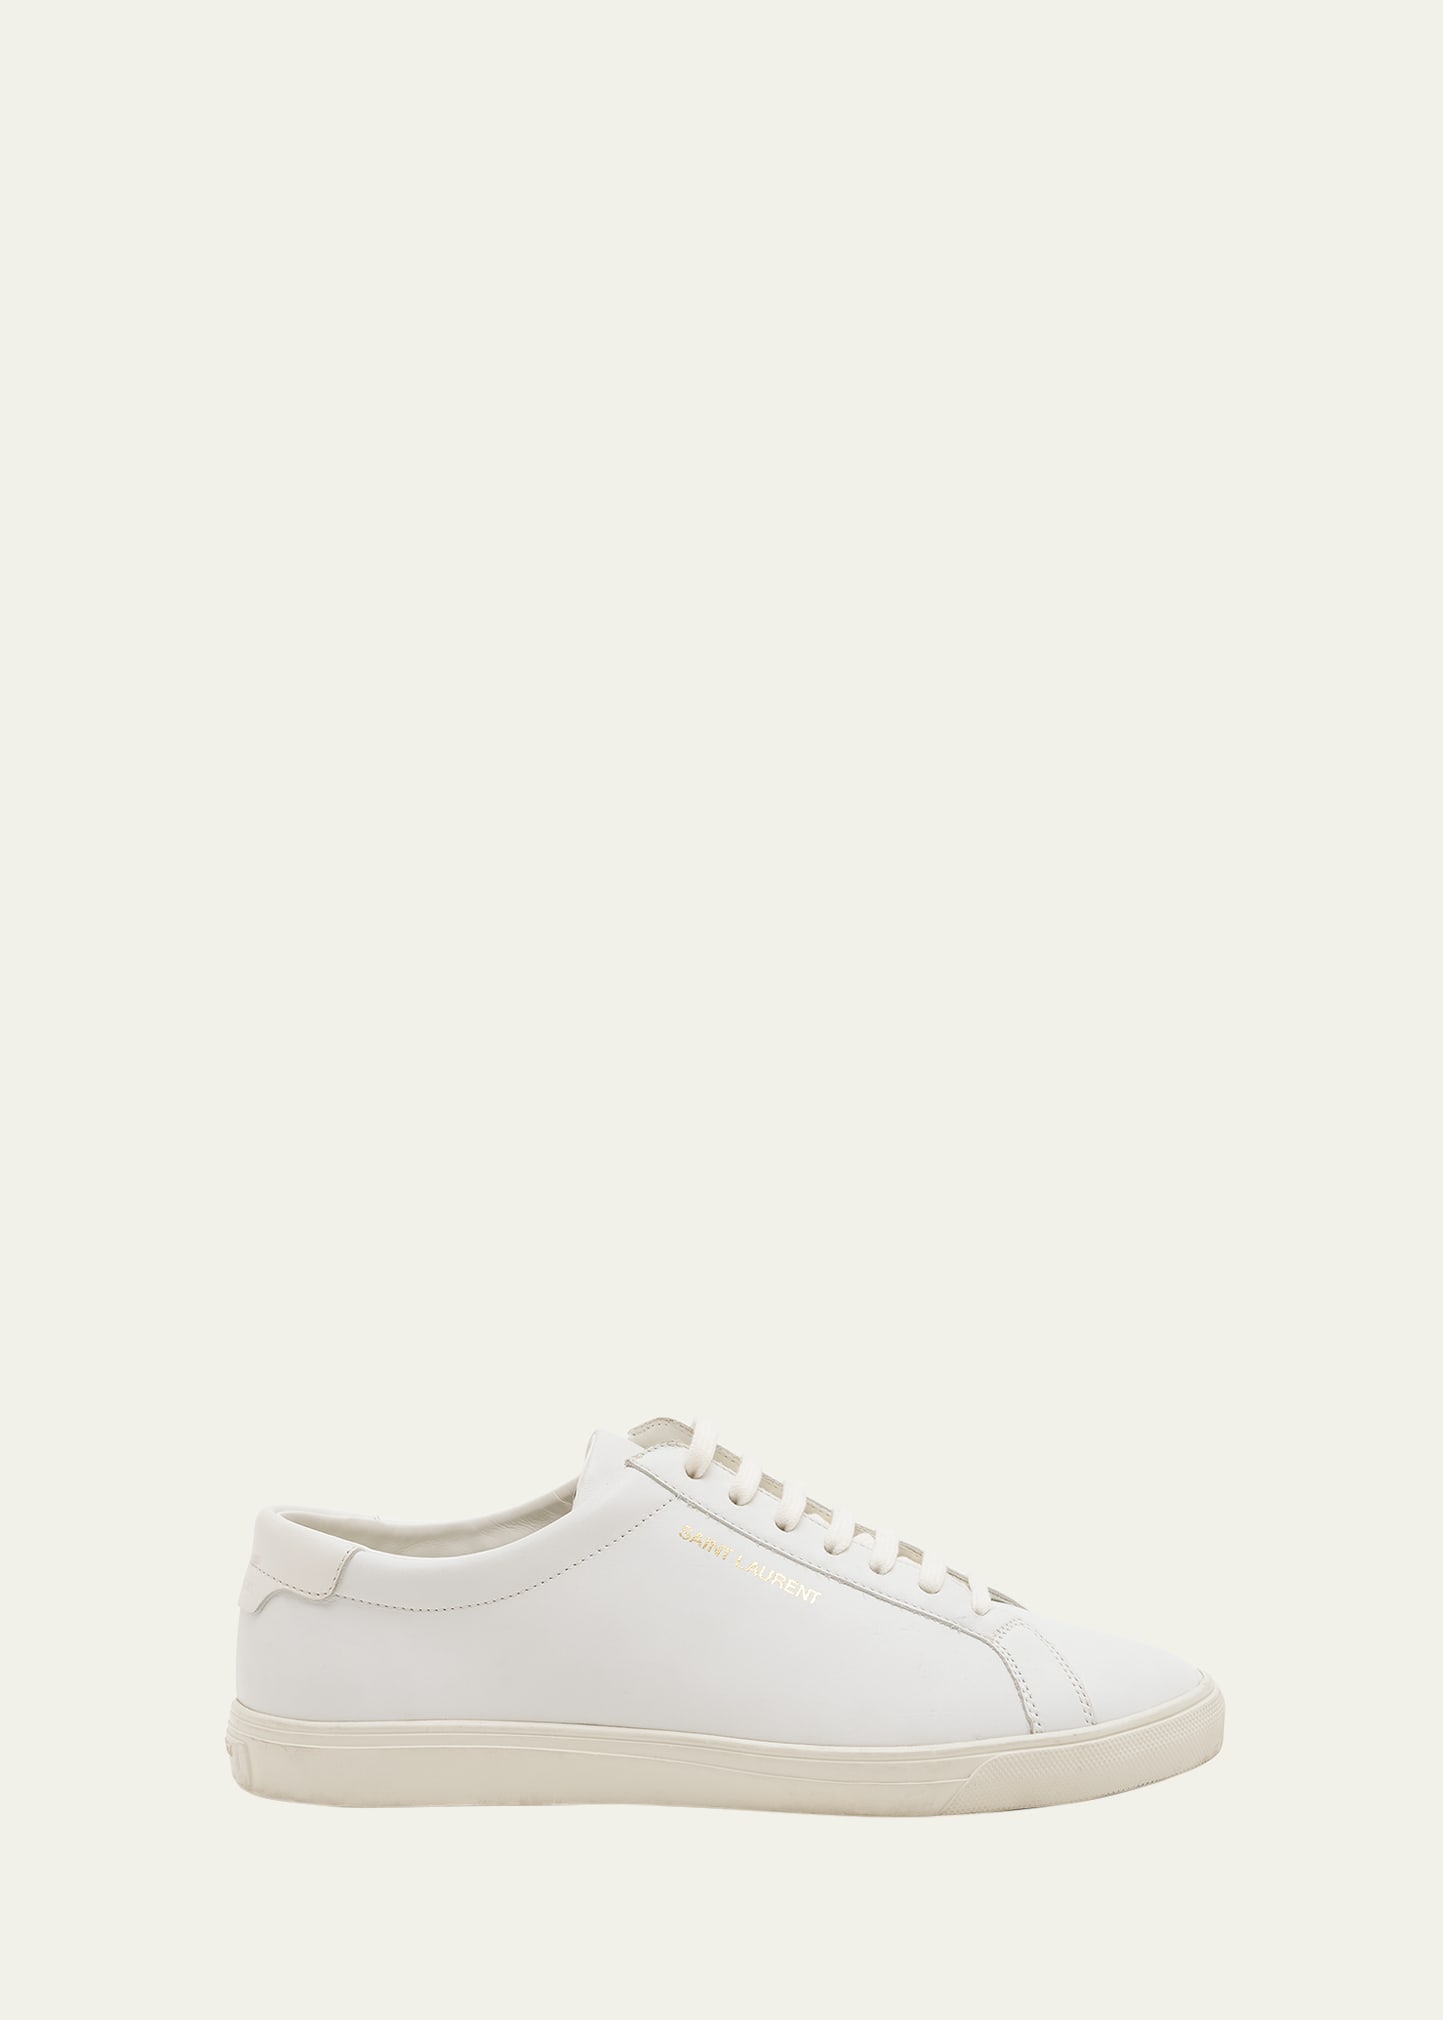 Saint Laurent Men's Andy Leather Low-top Sneakers In White